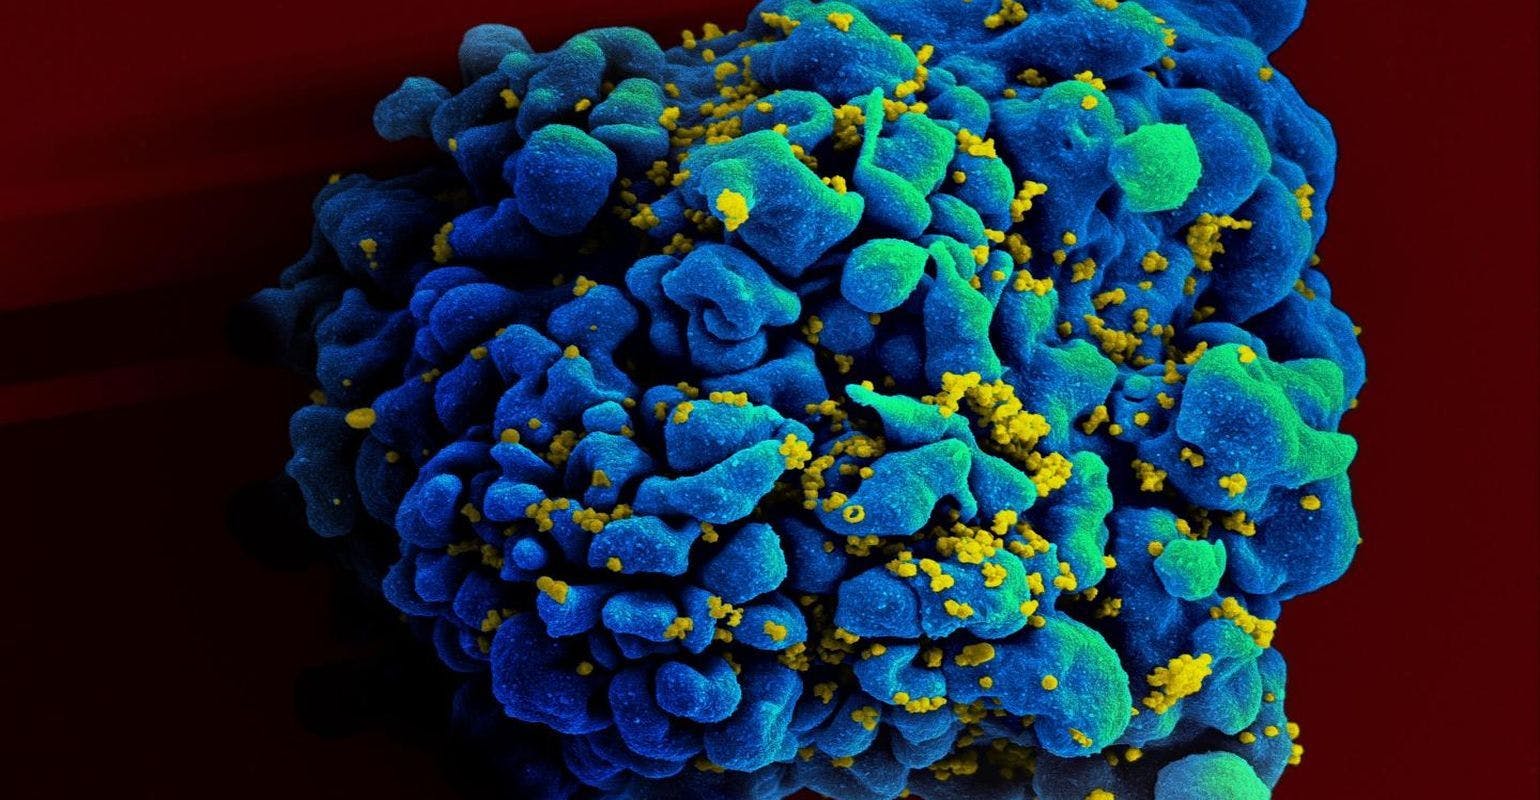 NIH HIV Experts Prioritize Research to Achieve Sustained ART-Free HIV Remission